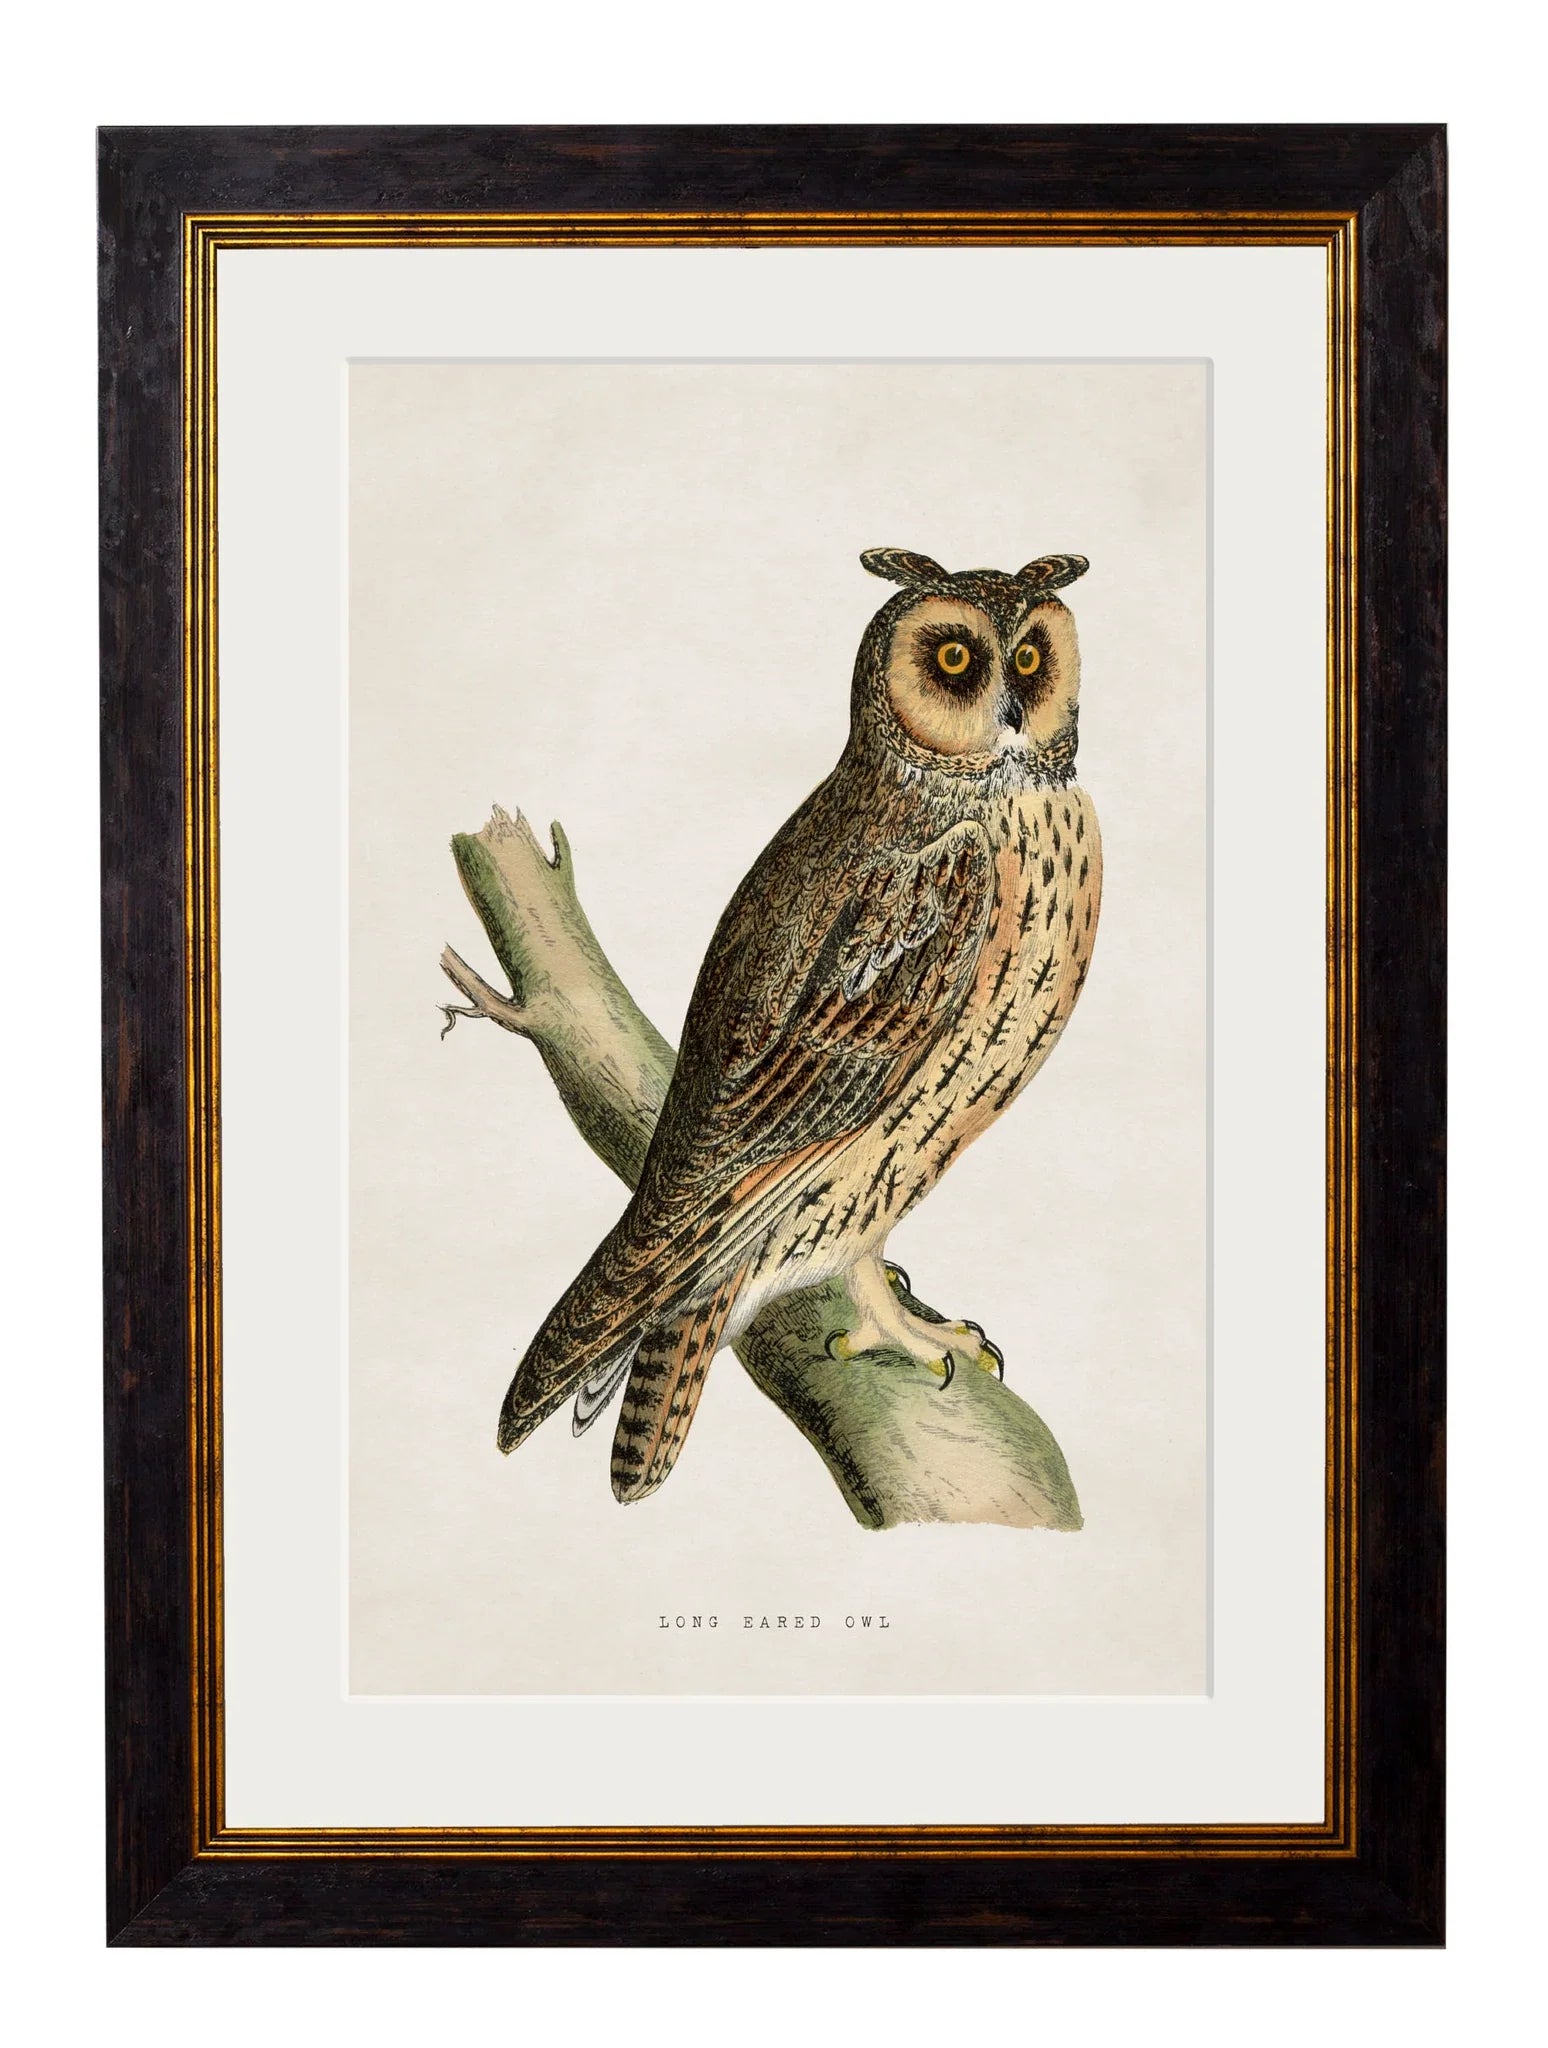 C.1870 British Owls Frames for sale - Woodcock and Cavendish